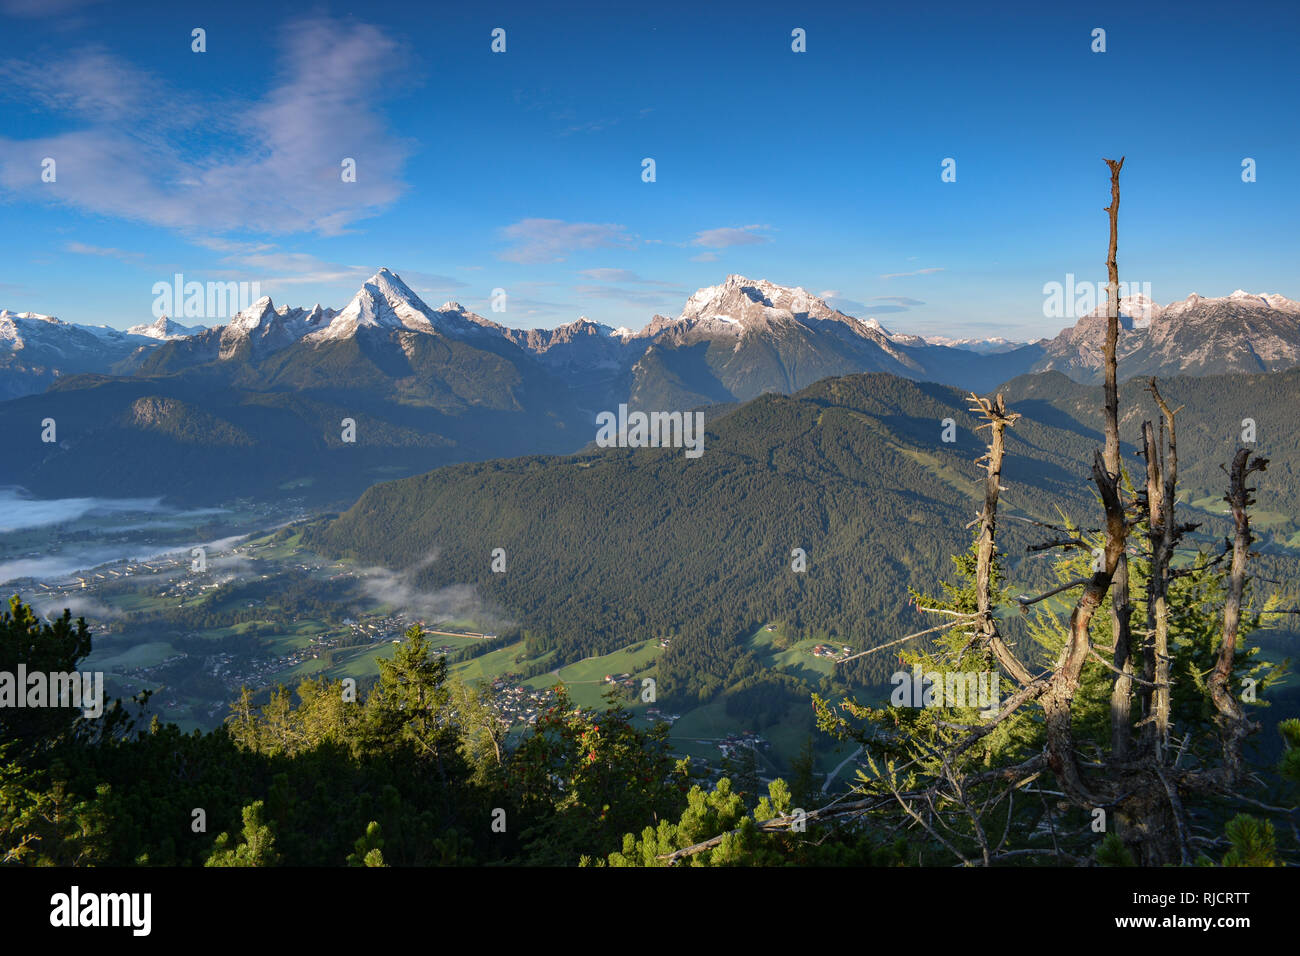 early morning view of Berchtesgaden with mountains Watzmann and Hochkalter, upper Bavaria, Germany Stock Photo